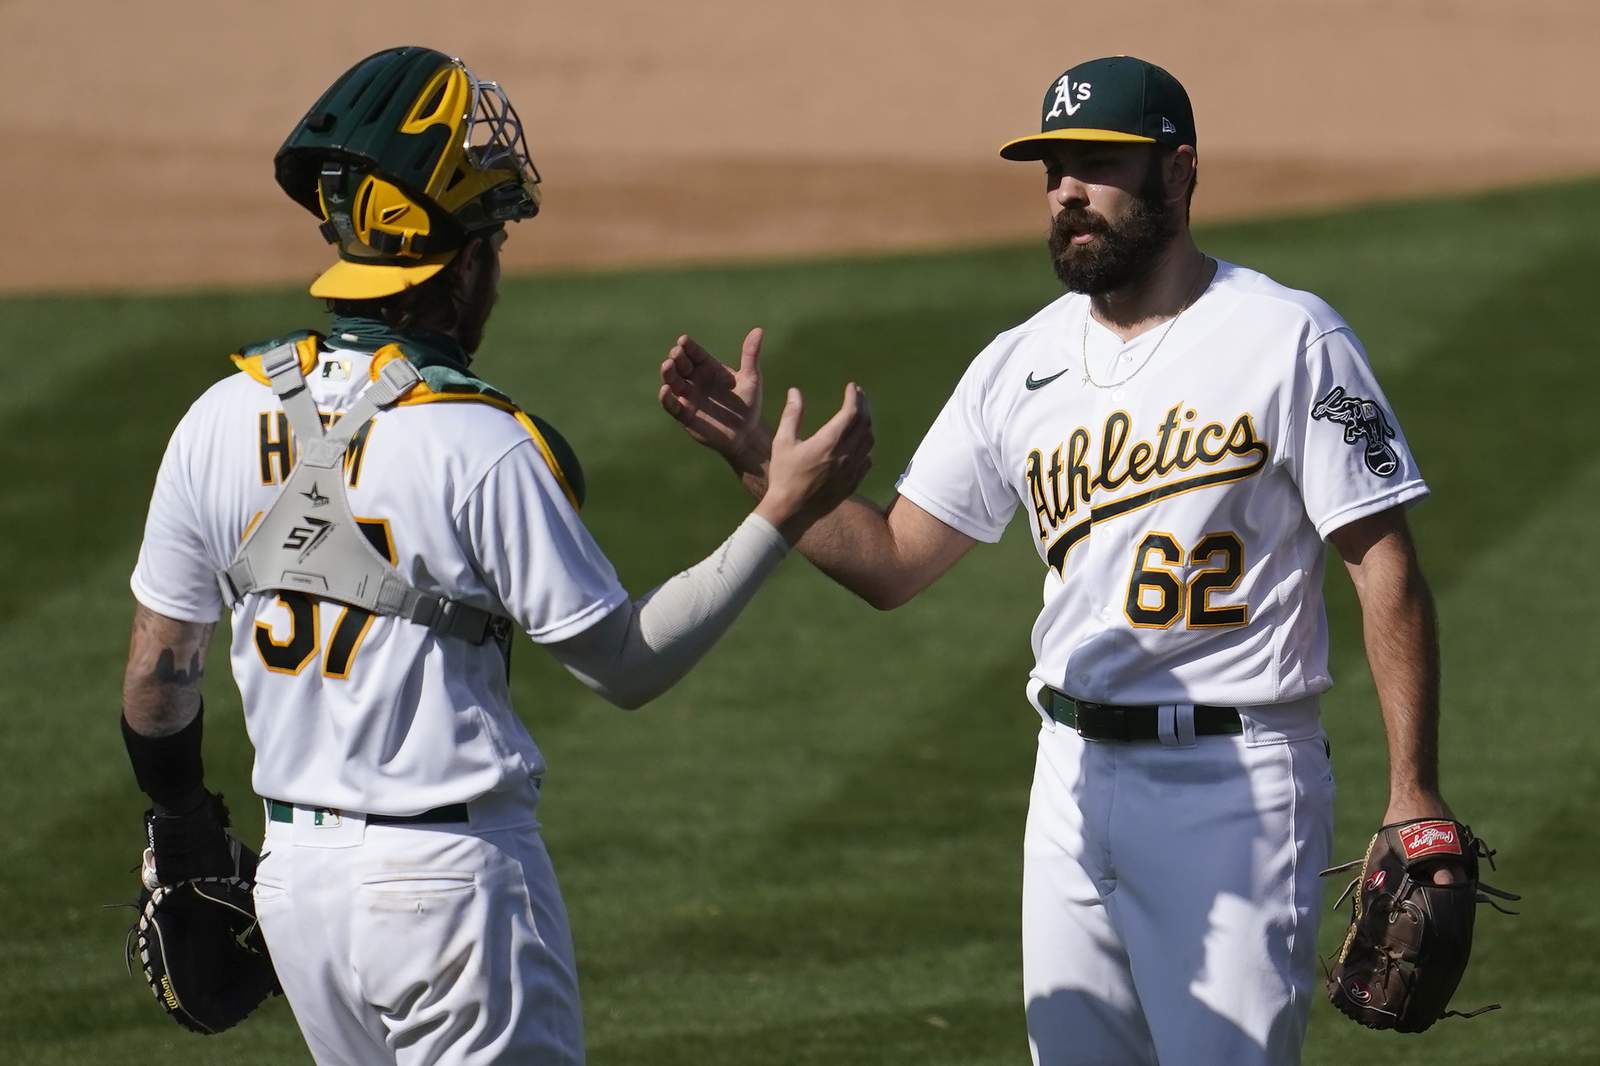 Oakland Athletics clinch first AL West title since 2013